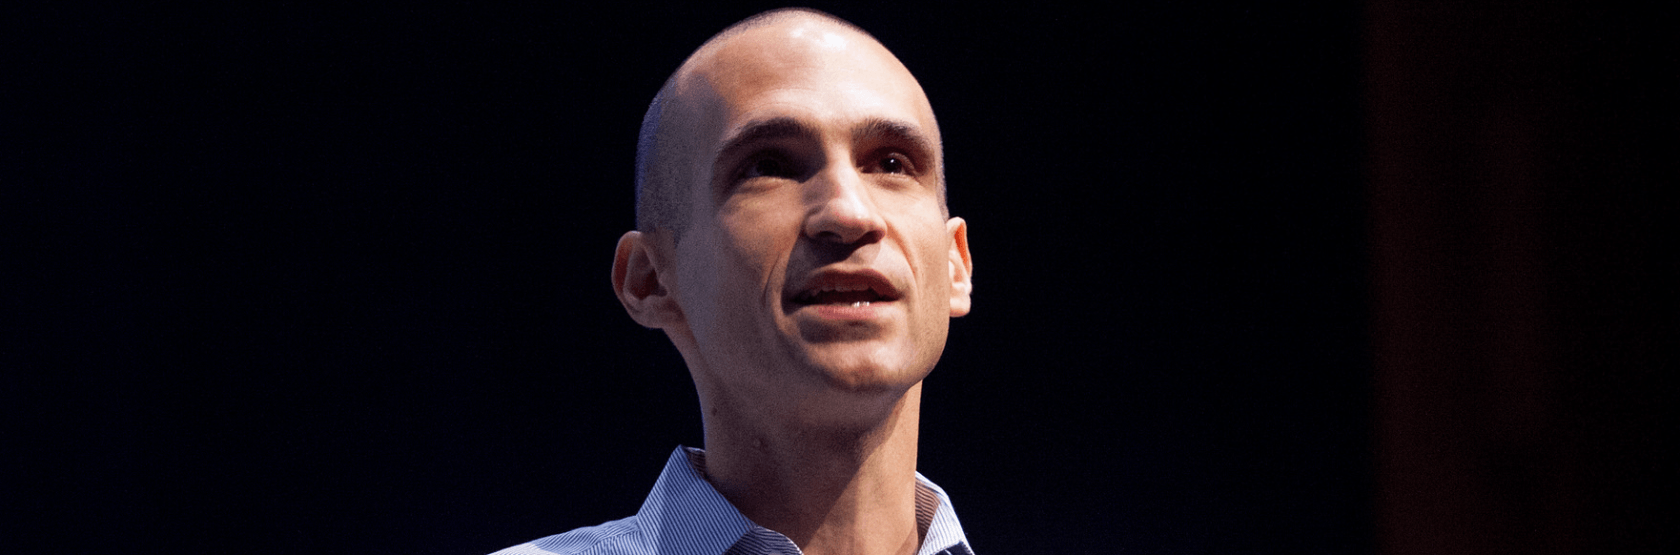 Building habit-forming products: an interview with Nir Eyal